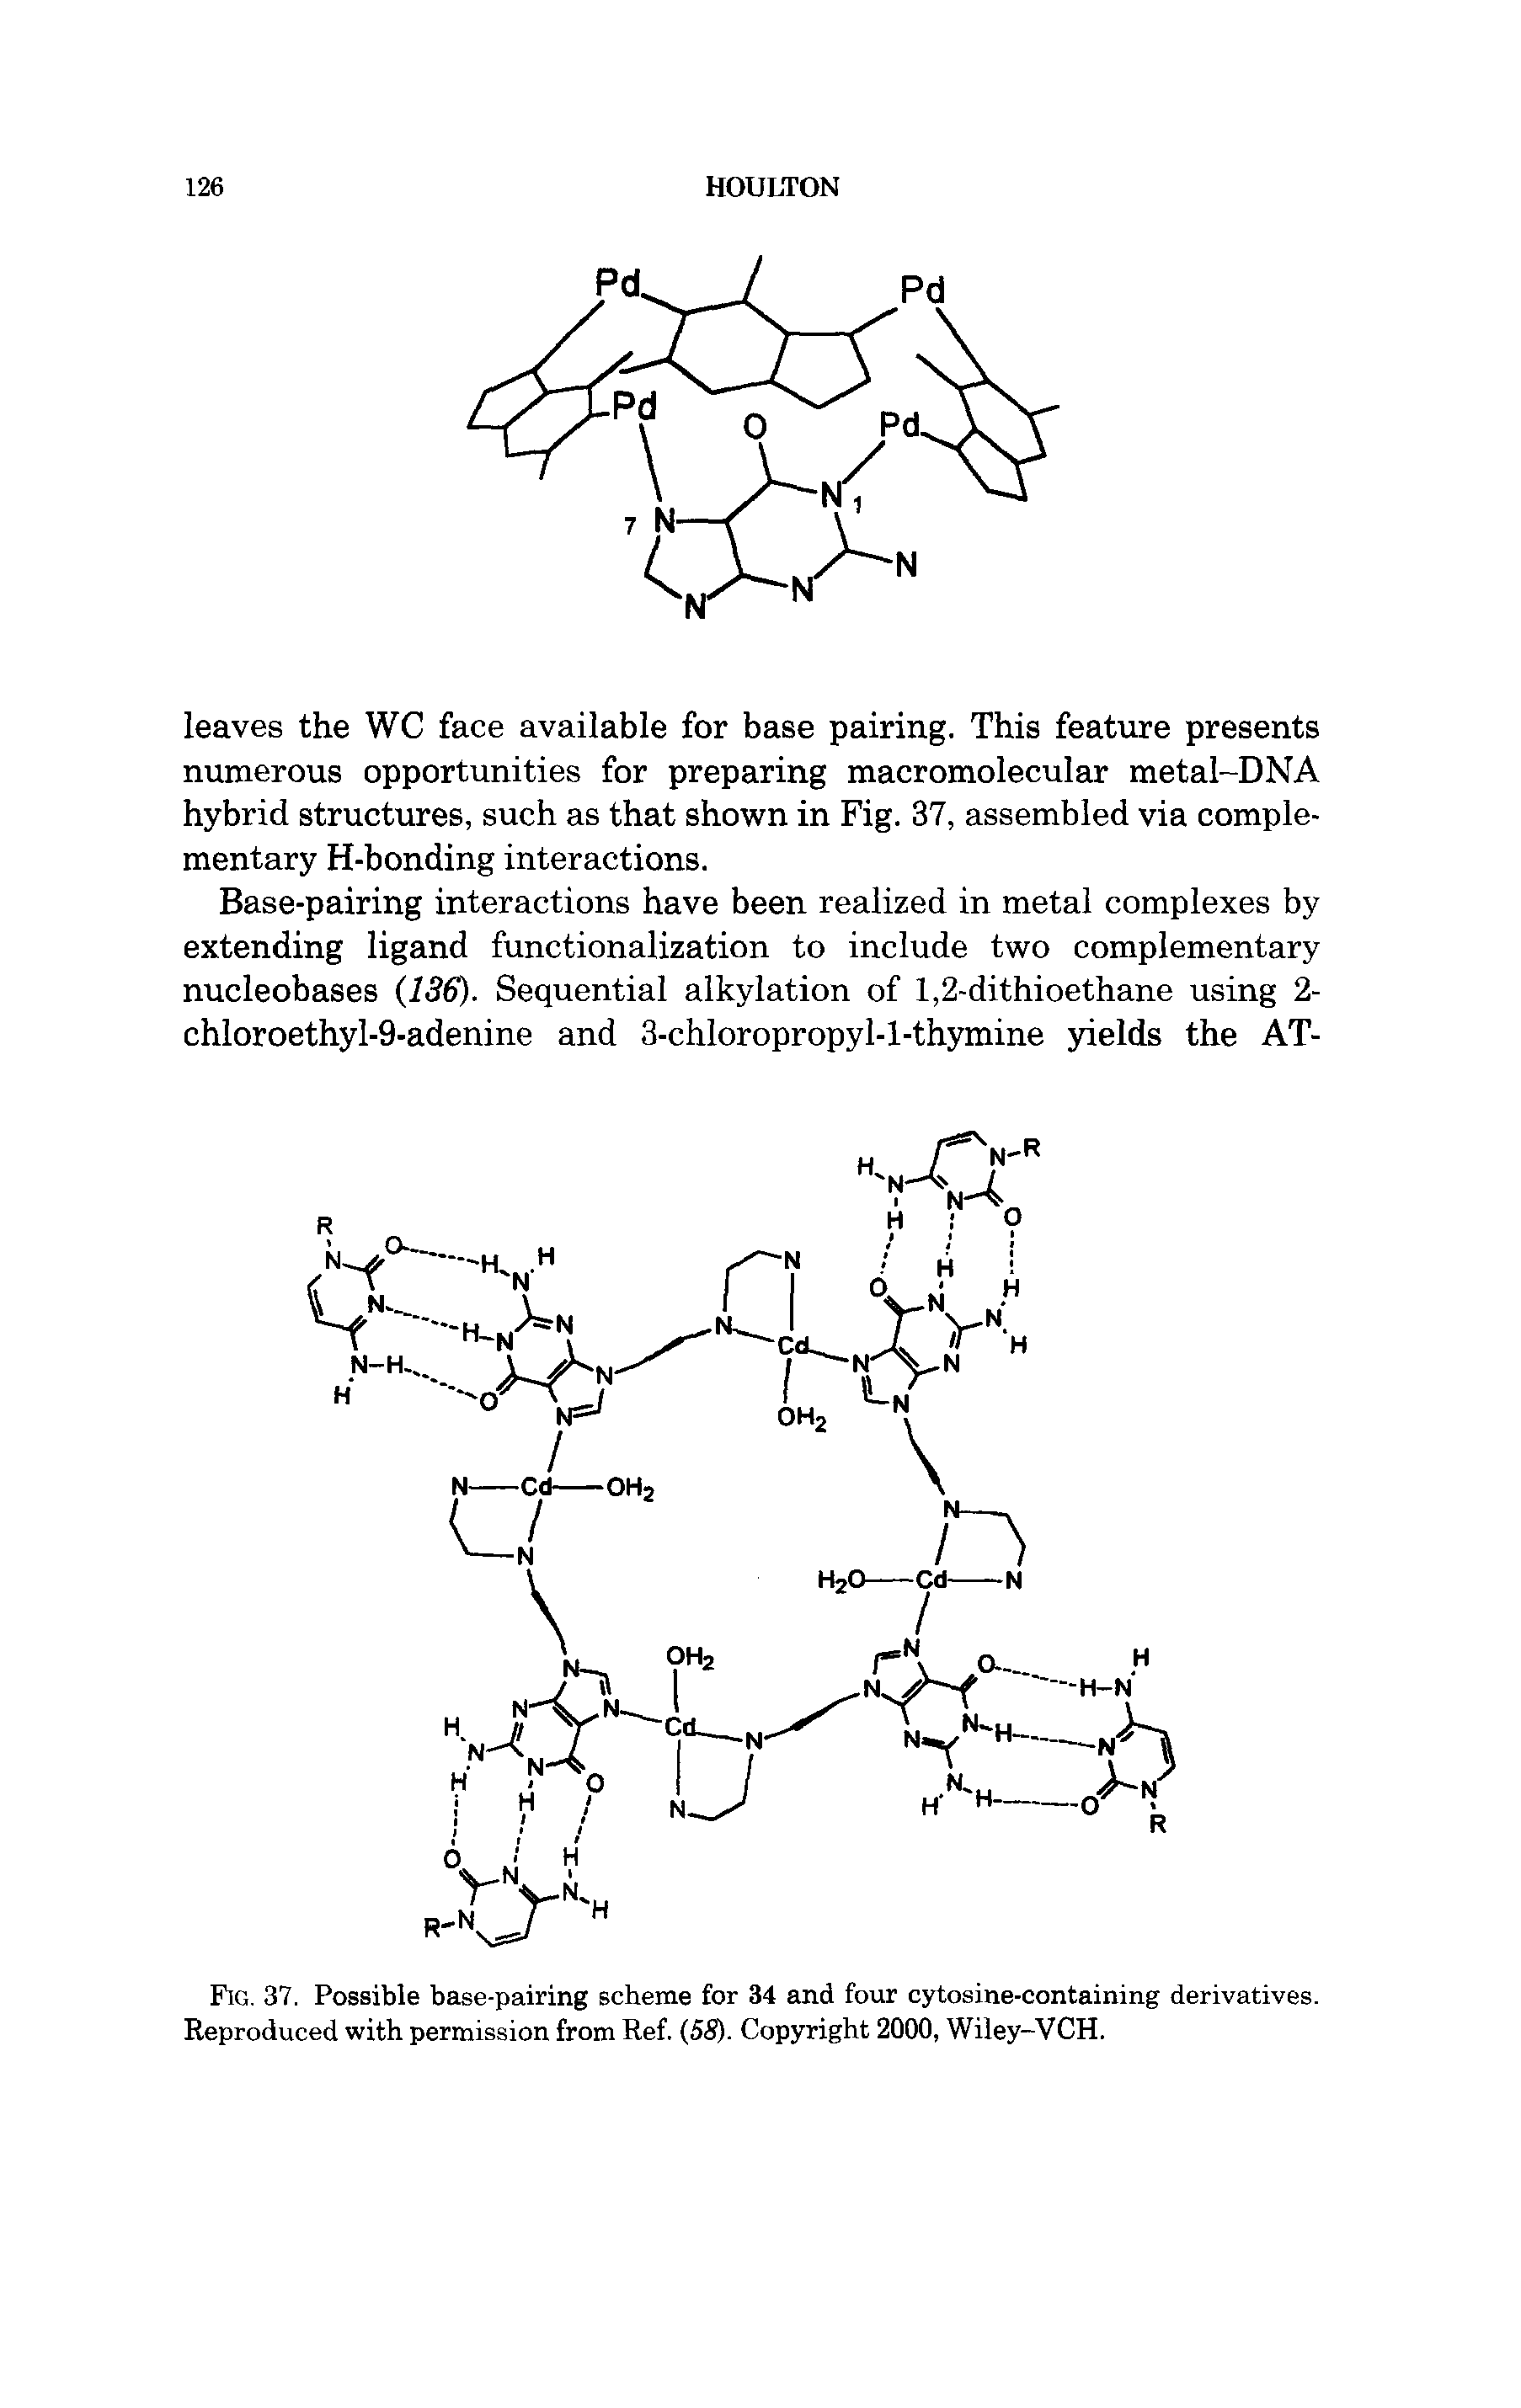 Fig. 37. Possible base-pairing scheme for 34 and four cytosine-containing derivatives. Reproduced with permission from Ref. (58). Copyright 2000, Wiley-VCH.